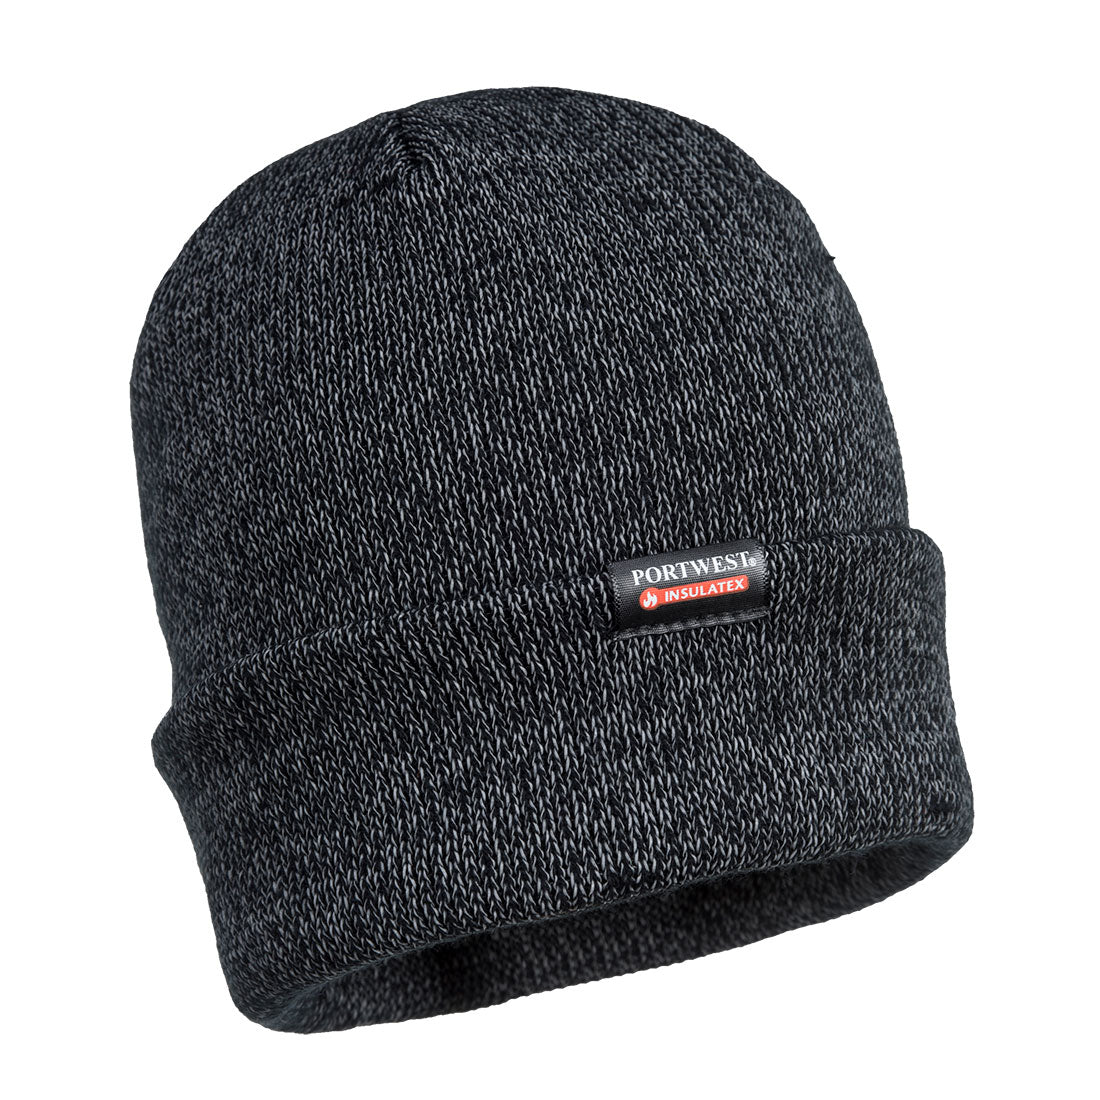 Insulated Reflective Knit Beanie  (B026)